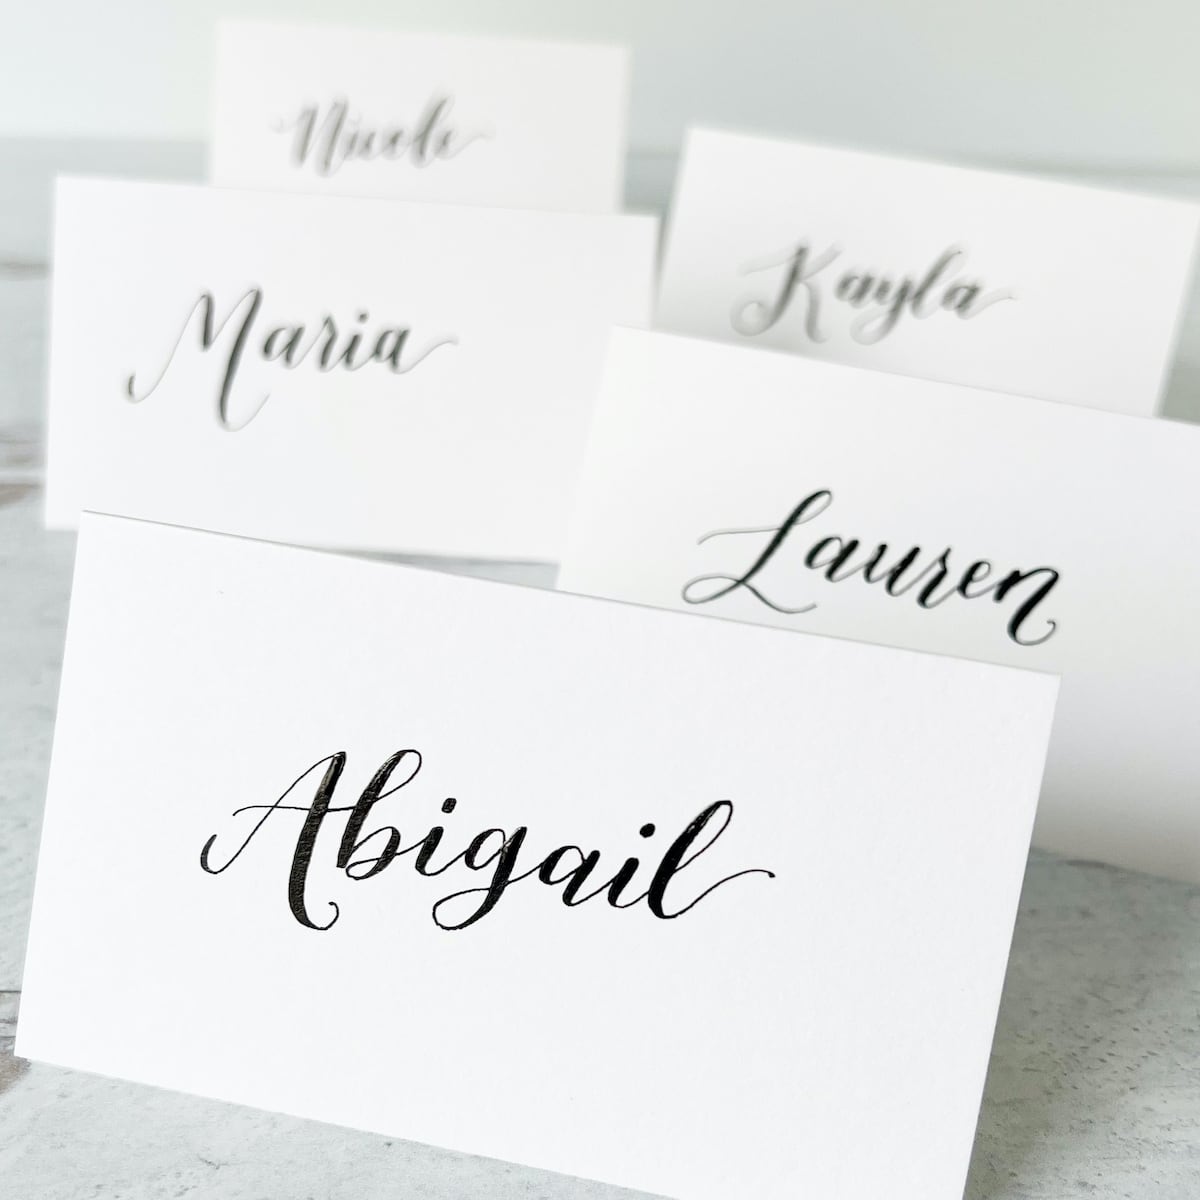 Bright White Colorplan Cardstock Place Cards with Calligraphy Writing